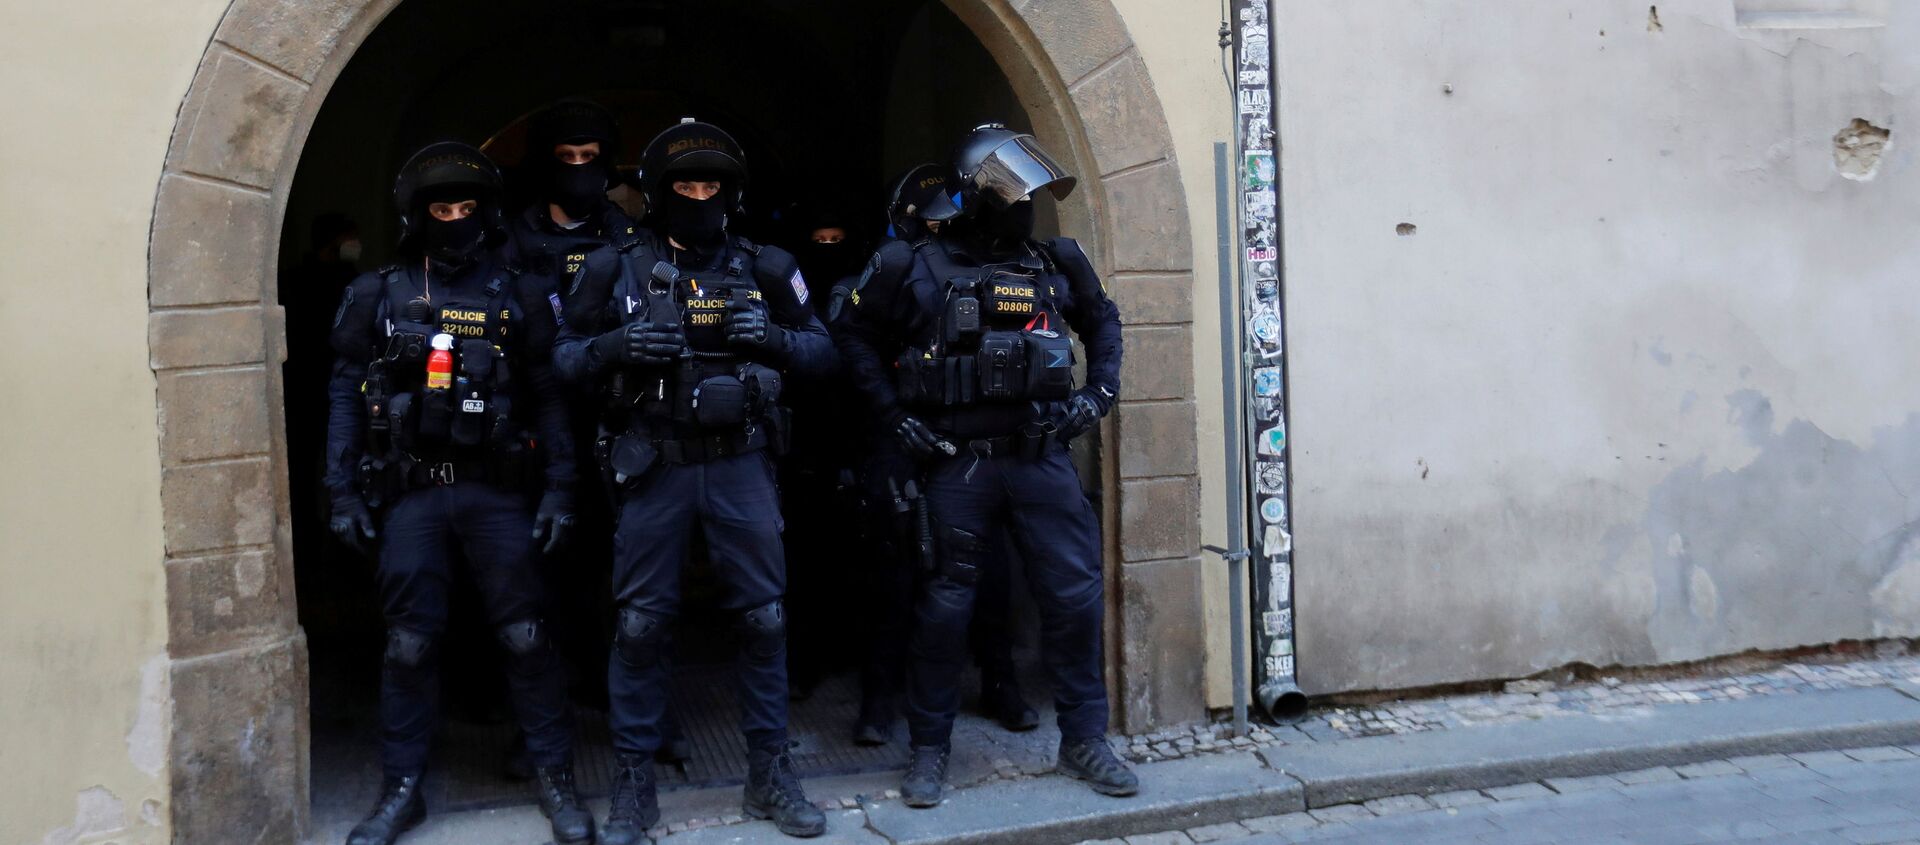 Riot police officers wait during a protest against the Czech government's restrictions at the Old Town Square, as the spread of the coronavirus disease (COVID-19) continues in Prague, Czech Republic, March 7, 2021 - Sputnik International, 1920